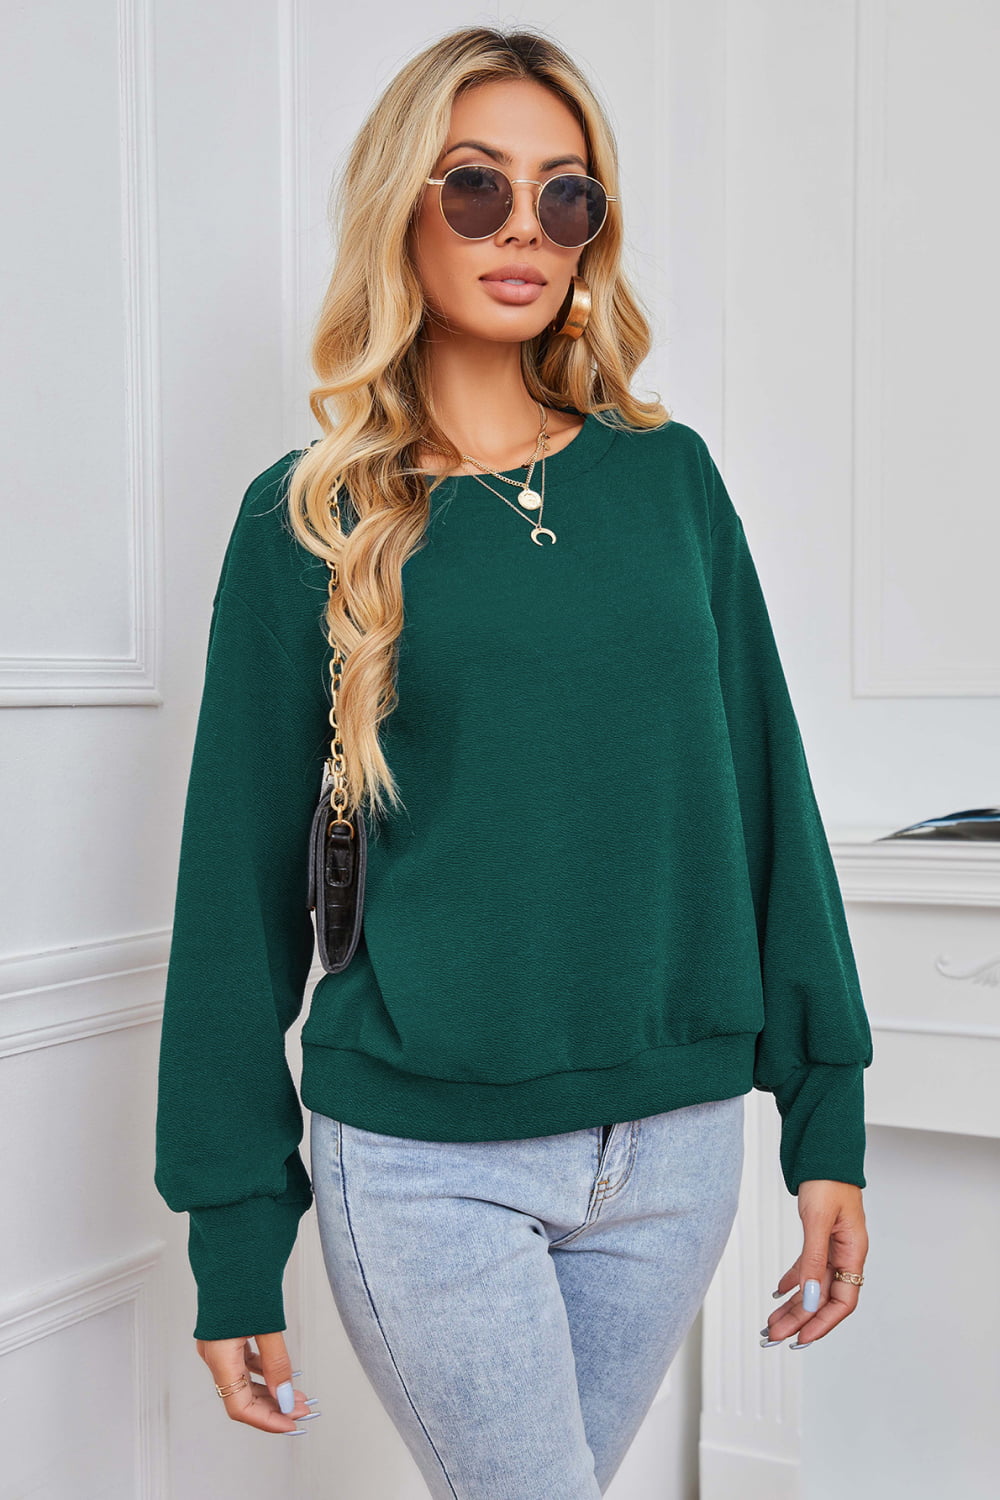 The Future Is Green Pullover Sweater